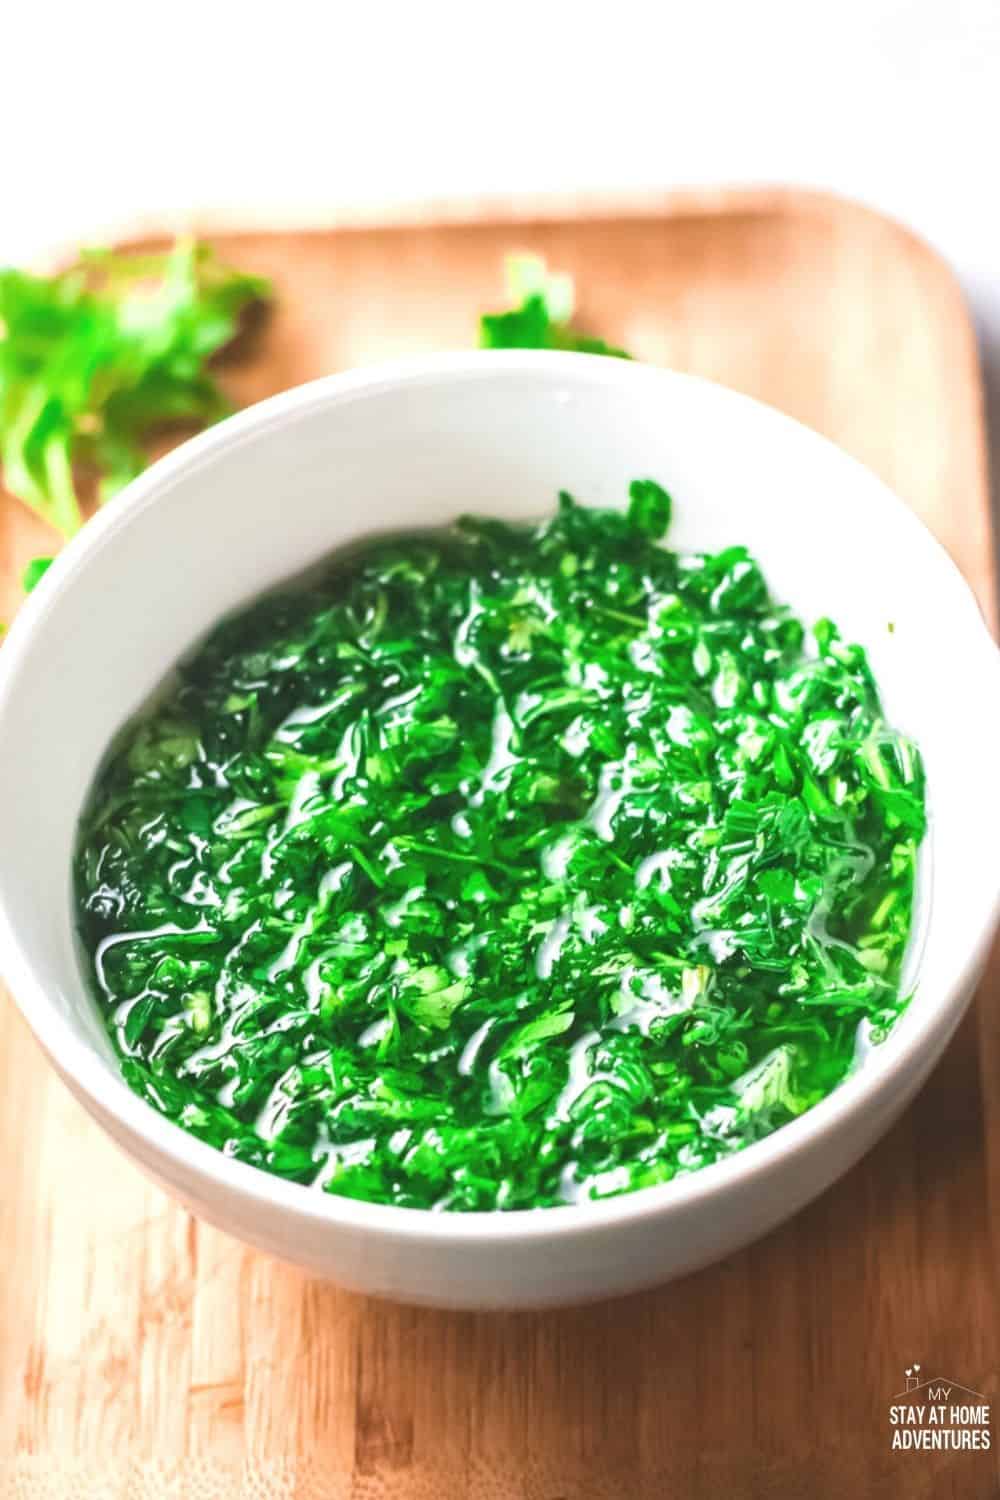 When it comes to condiments, chimichurri is a versatile sauce that can be used in many ways. Learn how to create this recipe today! via @mystayathome